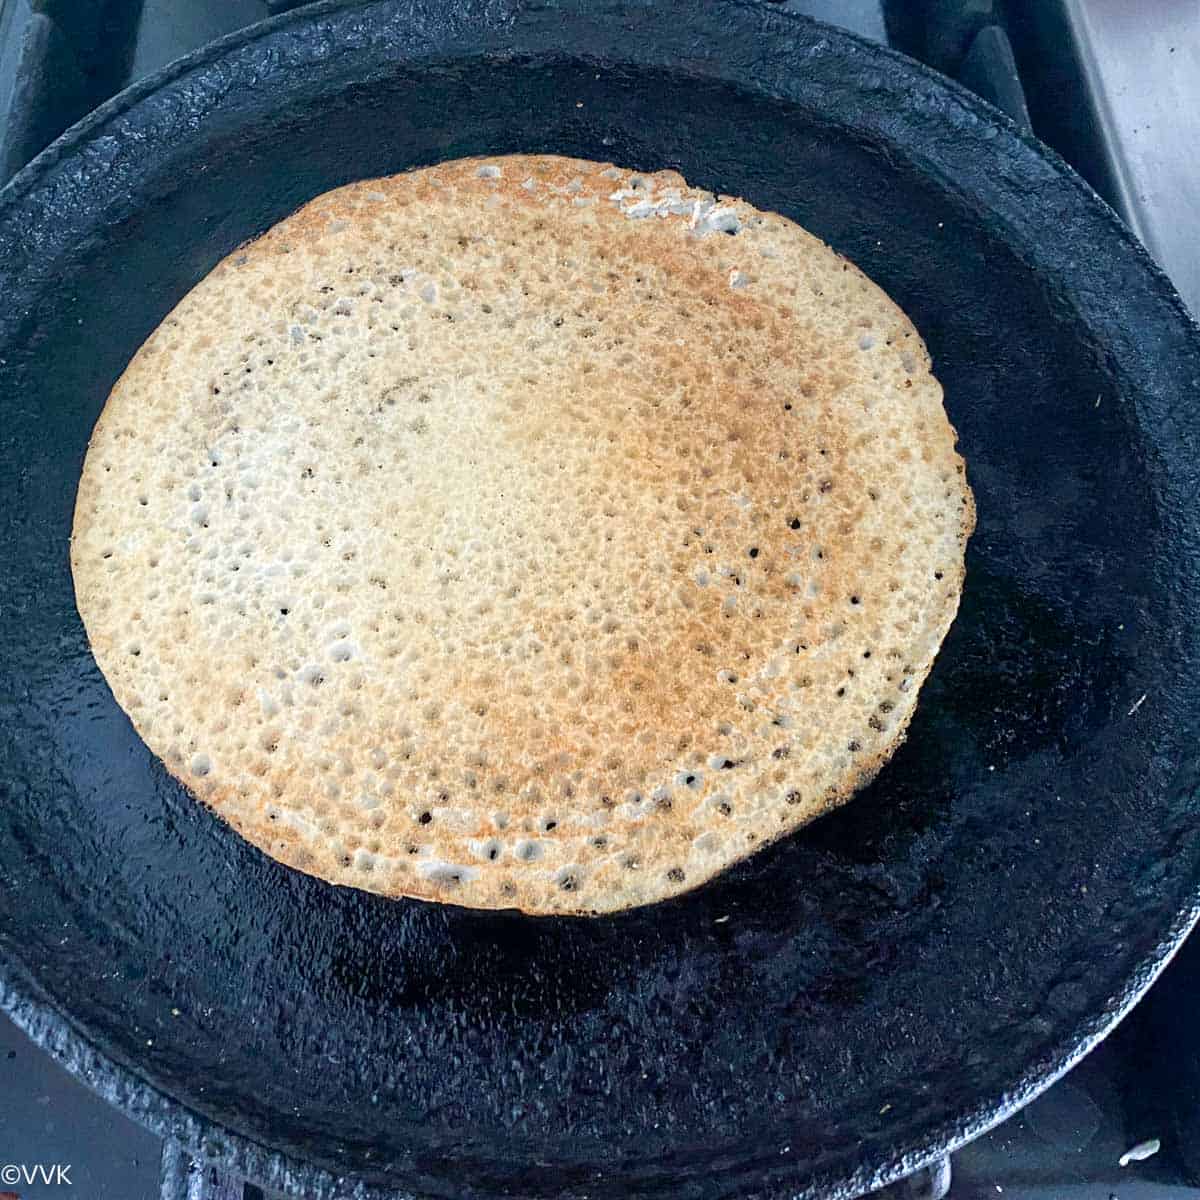 flip the dosa and cook again